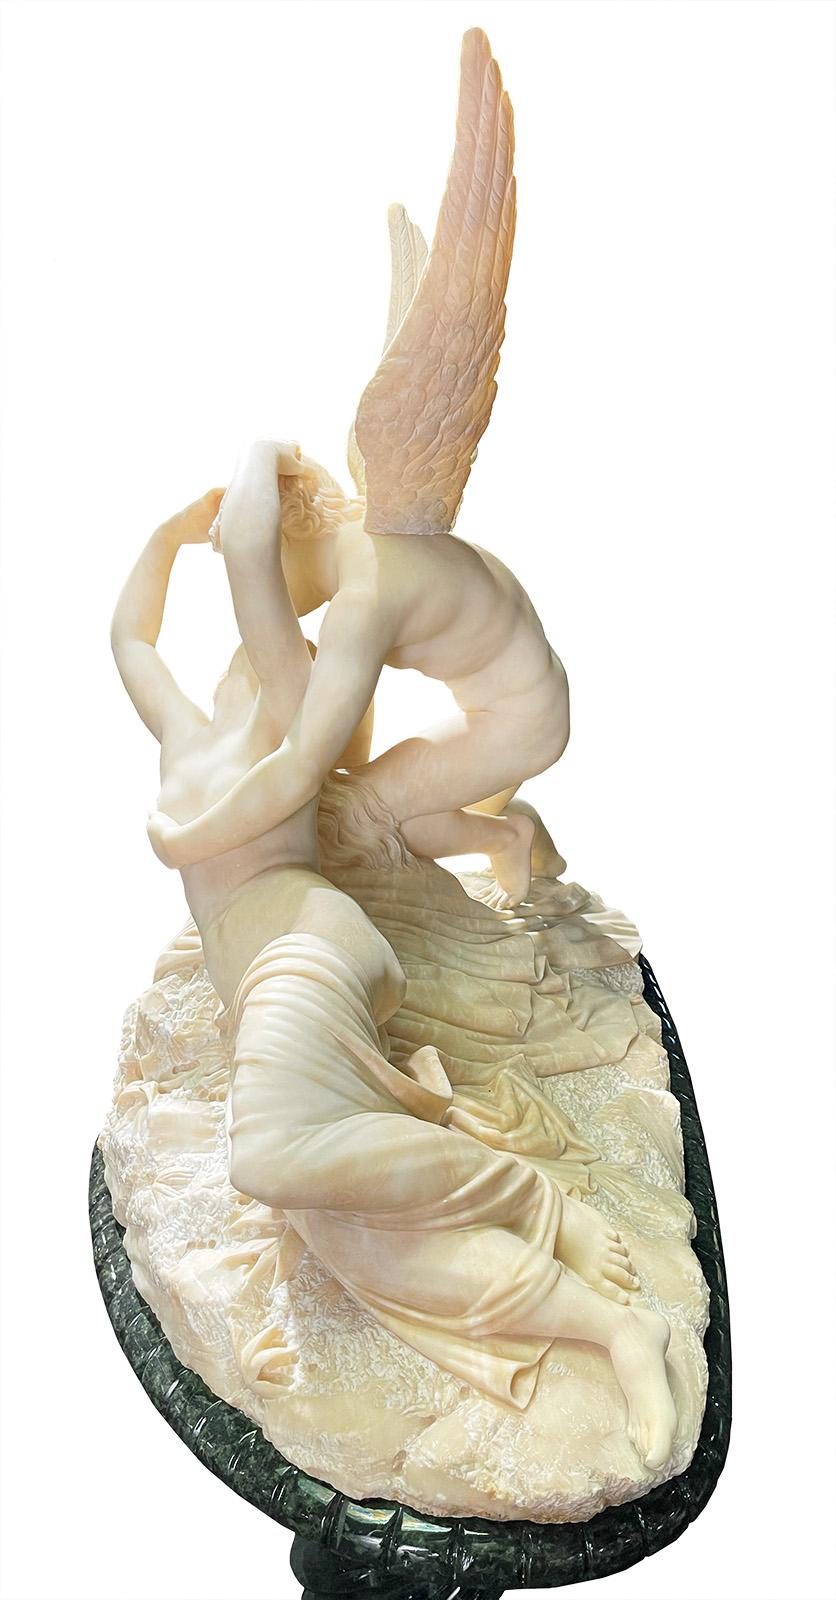 19th Century Psyche Revived by Cupid's Kiss Marble Sculpture on Pedestal after Antonio Canova For Sale